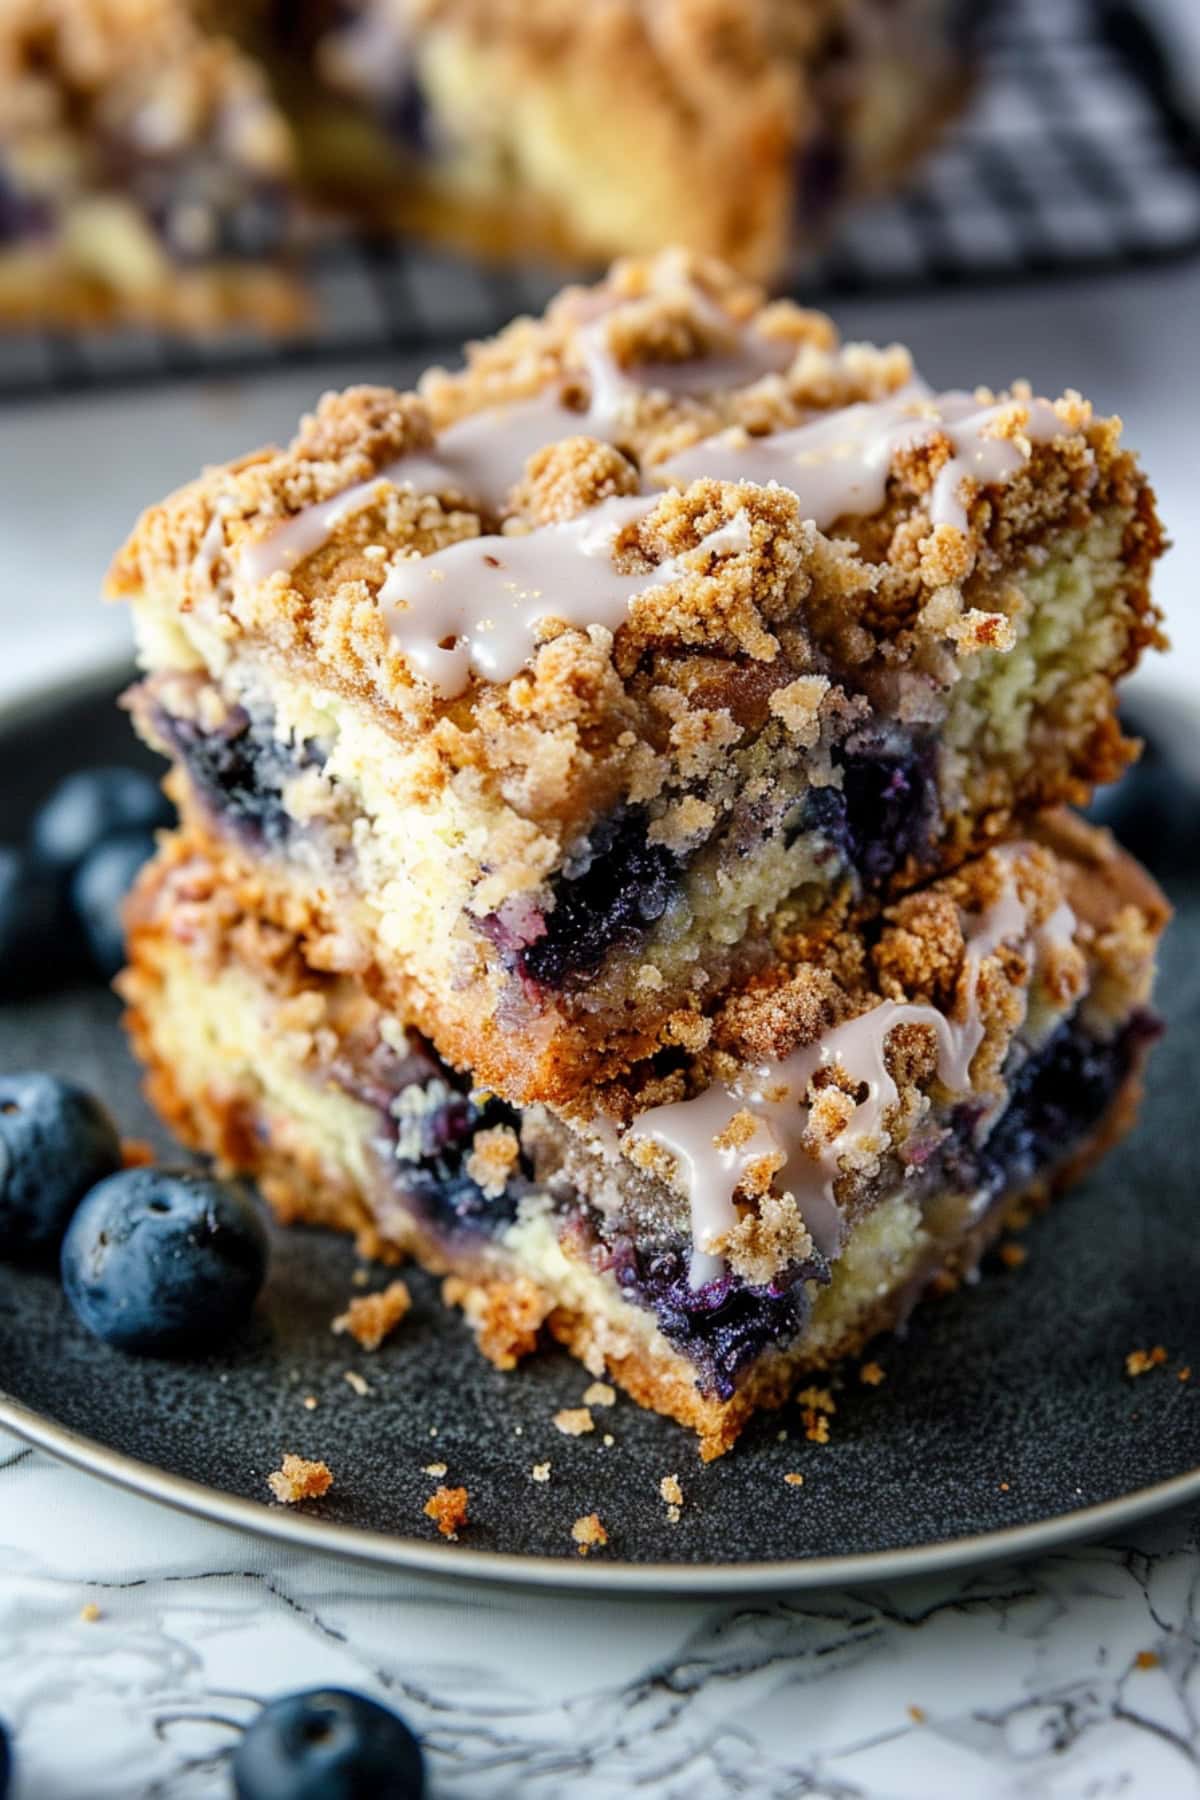 Homemade blueberry coffee cake topped with streusel crumble and vanilla glaze.